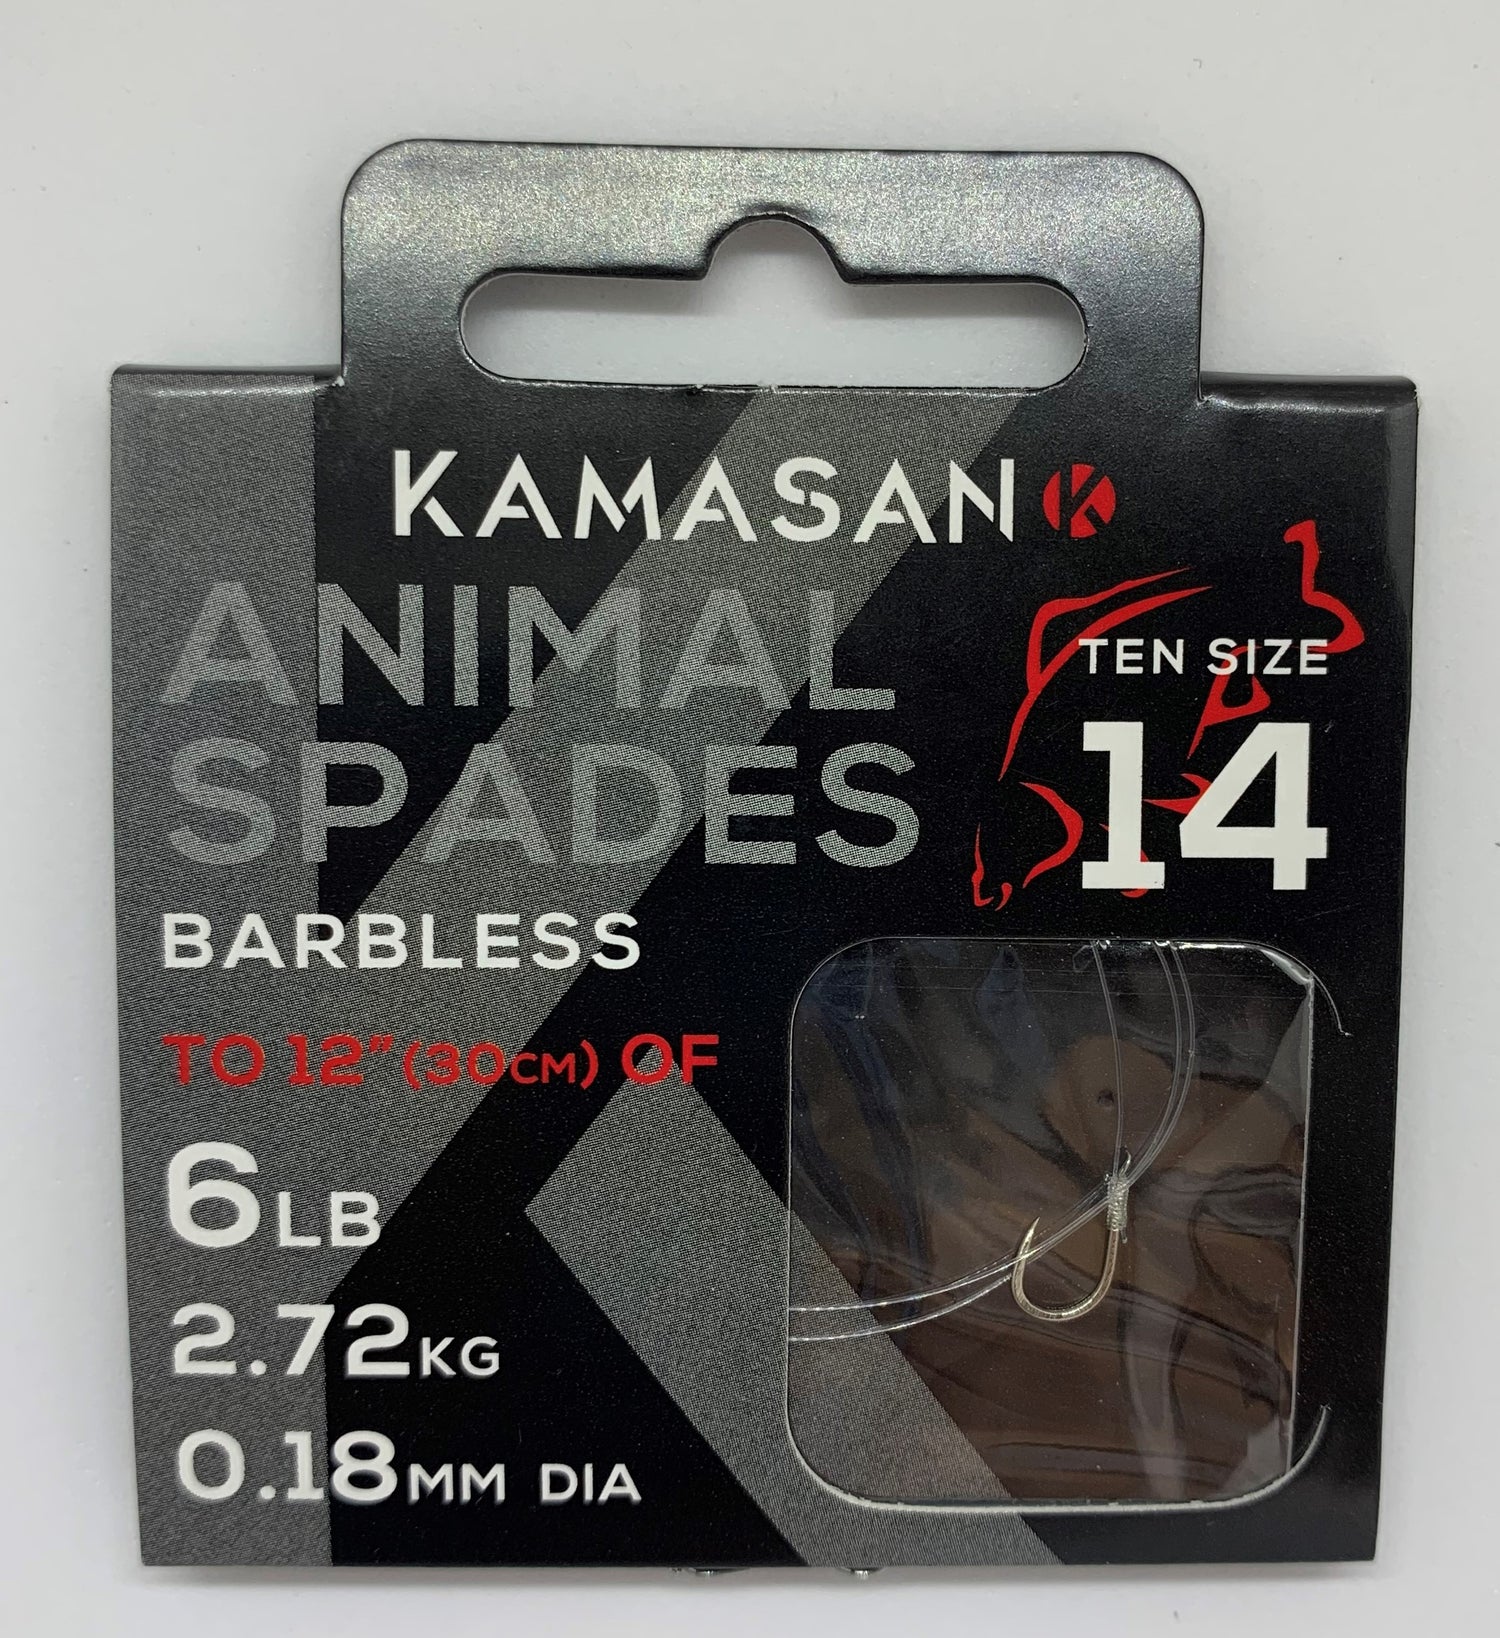 Kamasan Animal X-Strong Size 14 Hooks to Nylon. Ideal For Float Or Feeder Fishing.